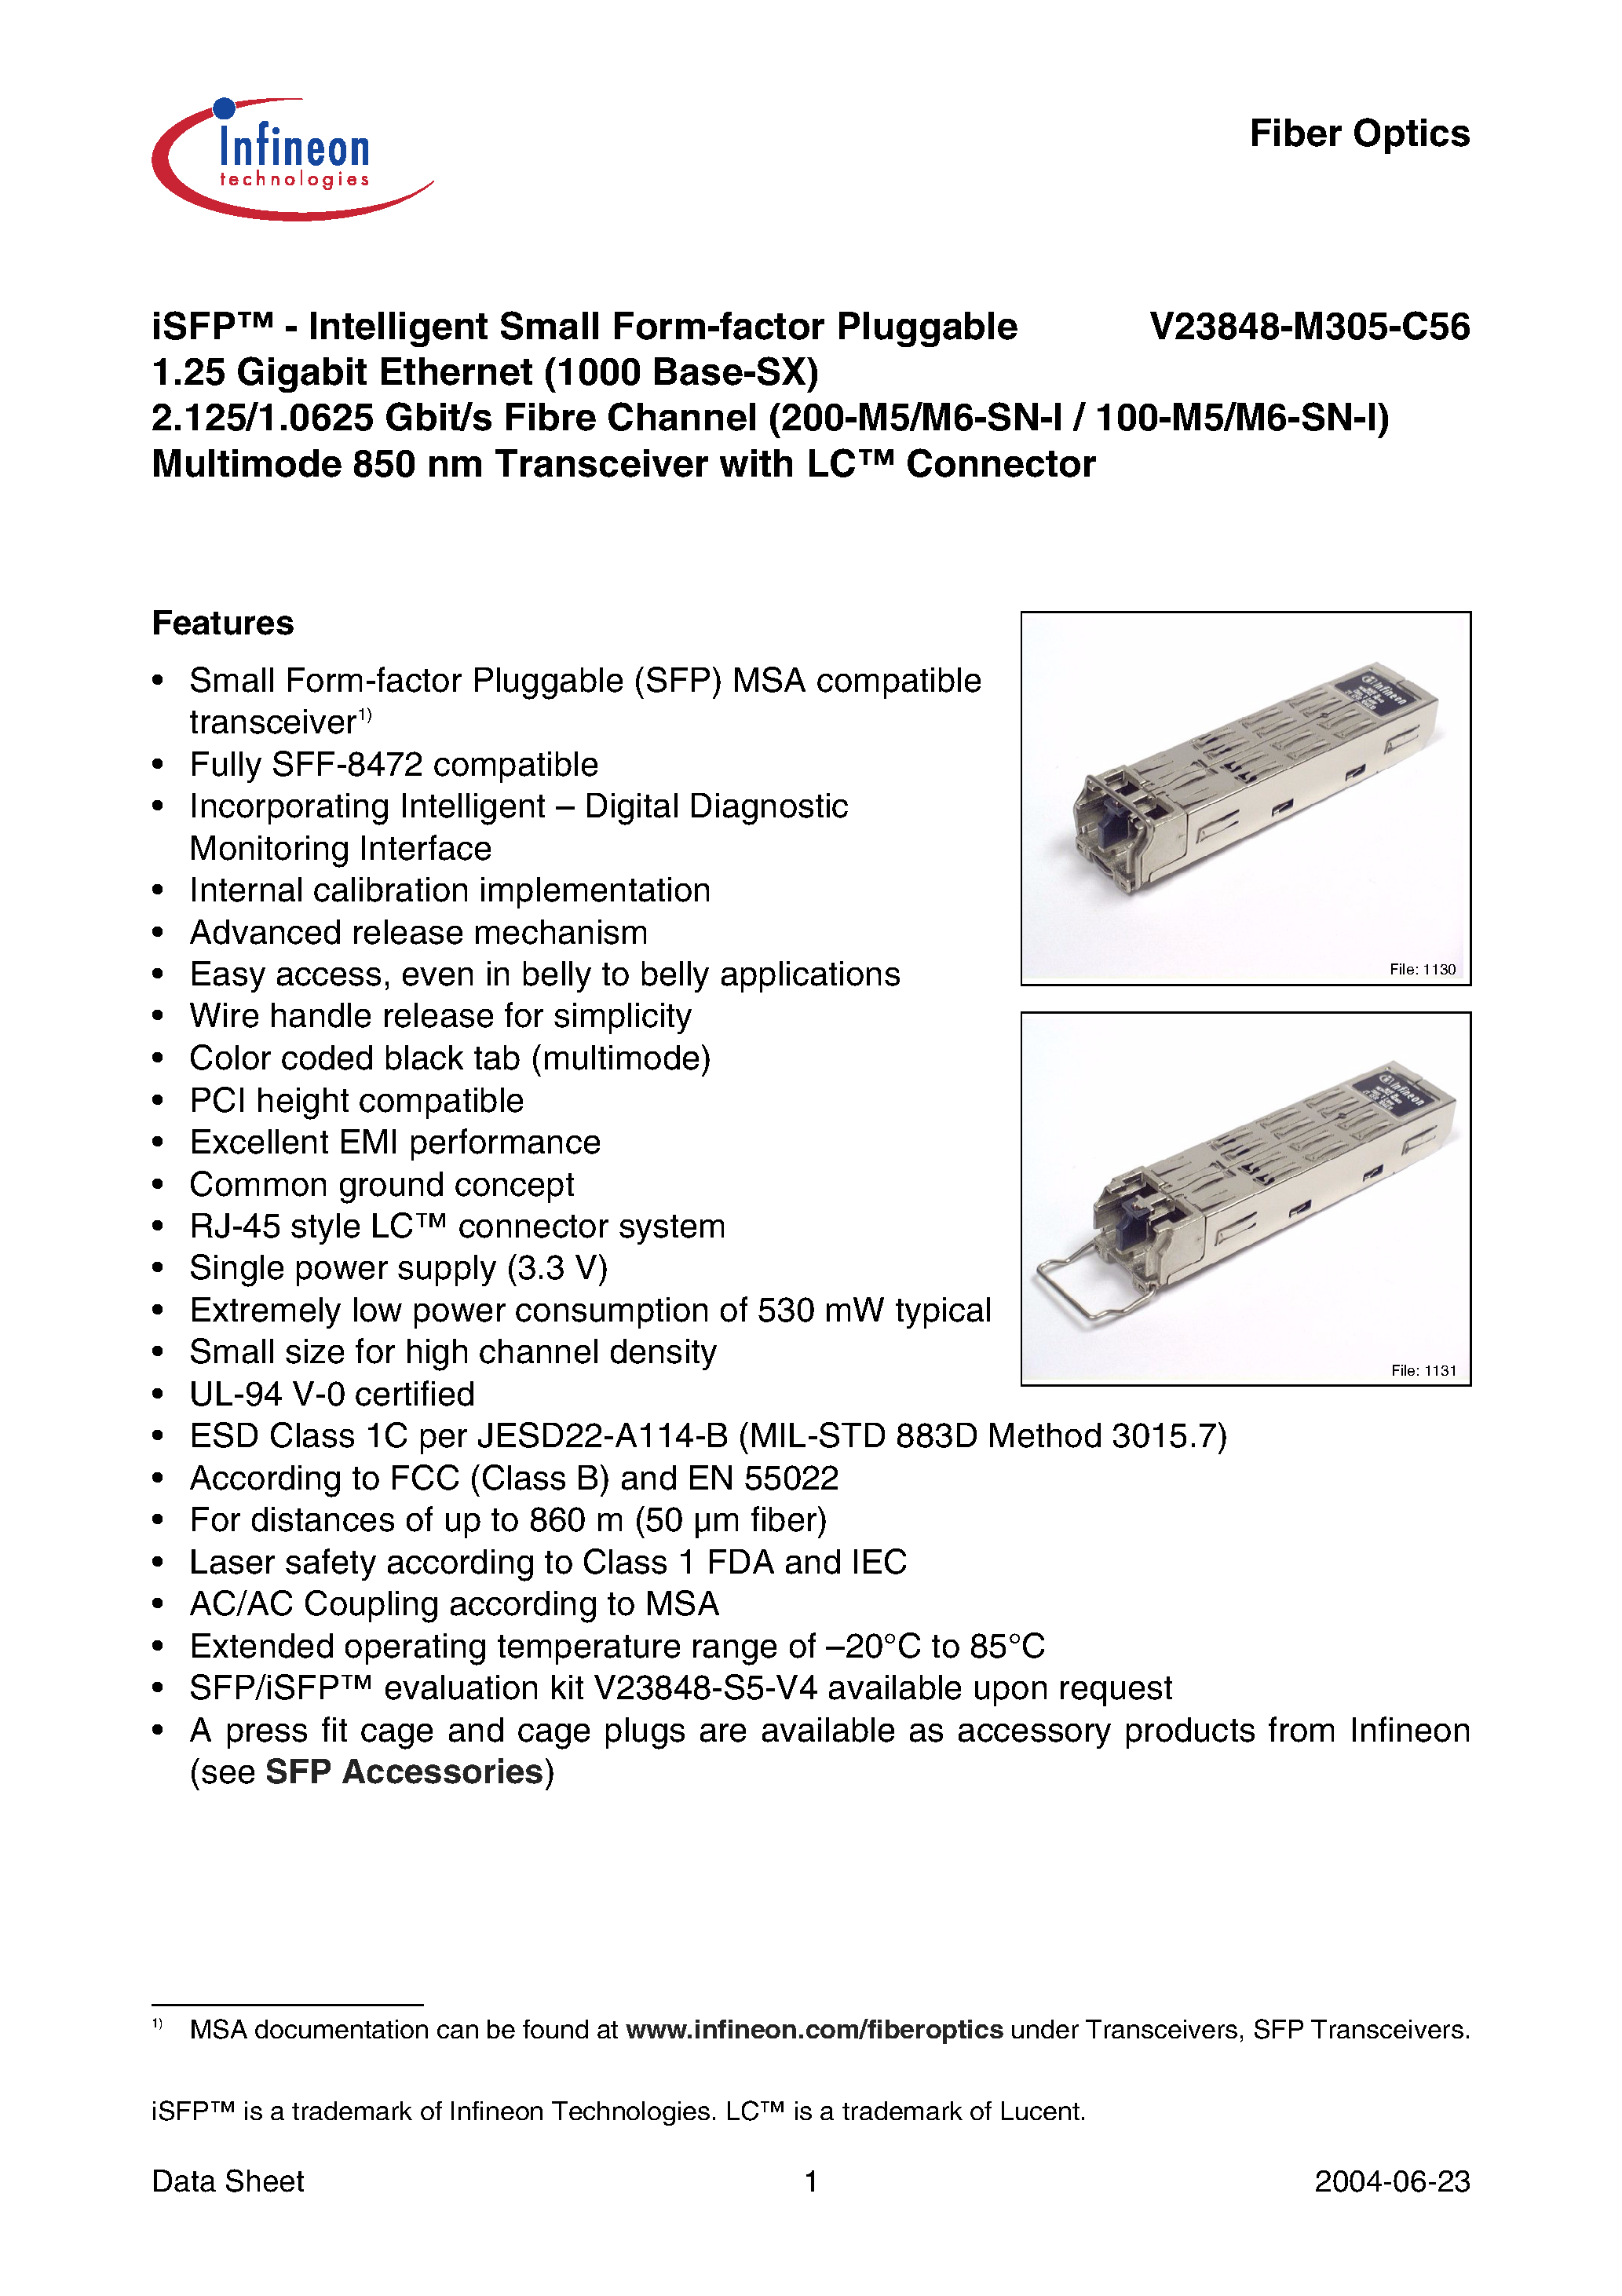 Datasheet V23848-M305-C56 - iSFP-Intelligent Small Form-factor Pluggable 1.25 Gigabit Ethernet 2.125/1.0625 Gbit/s Fibre Channel Multimode 850 nm Transceiver with LC Connector page 1